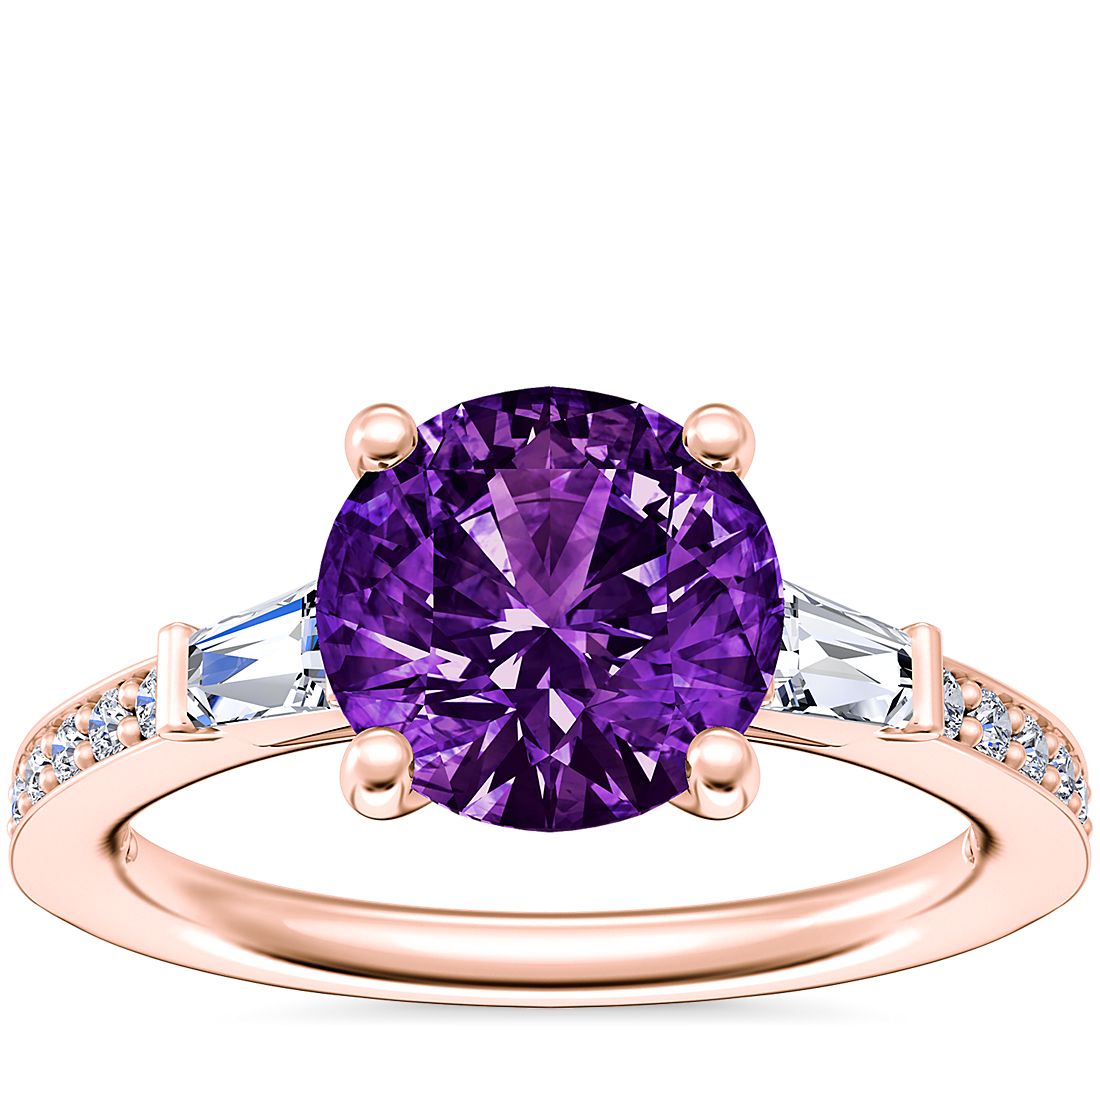 Tapered Baguette Diamond Cathedral Engagement Ring with Round Amethyst in 14k Rose Gold (8mm)